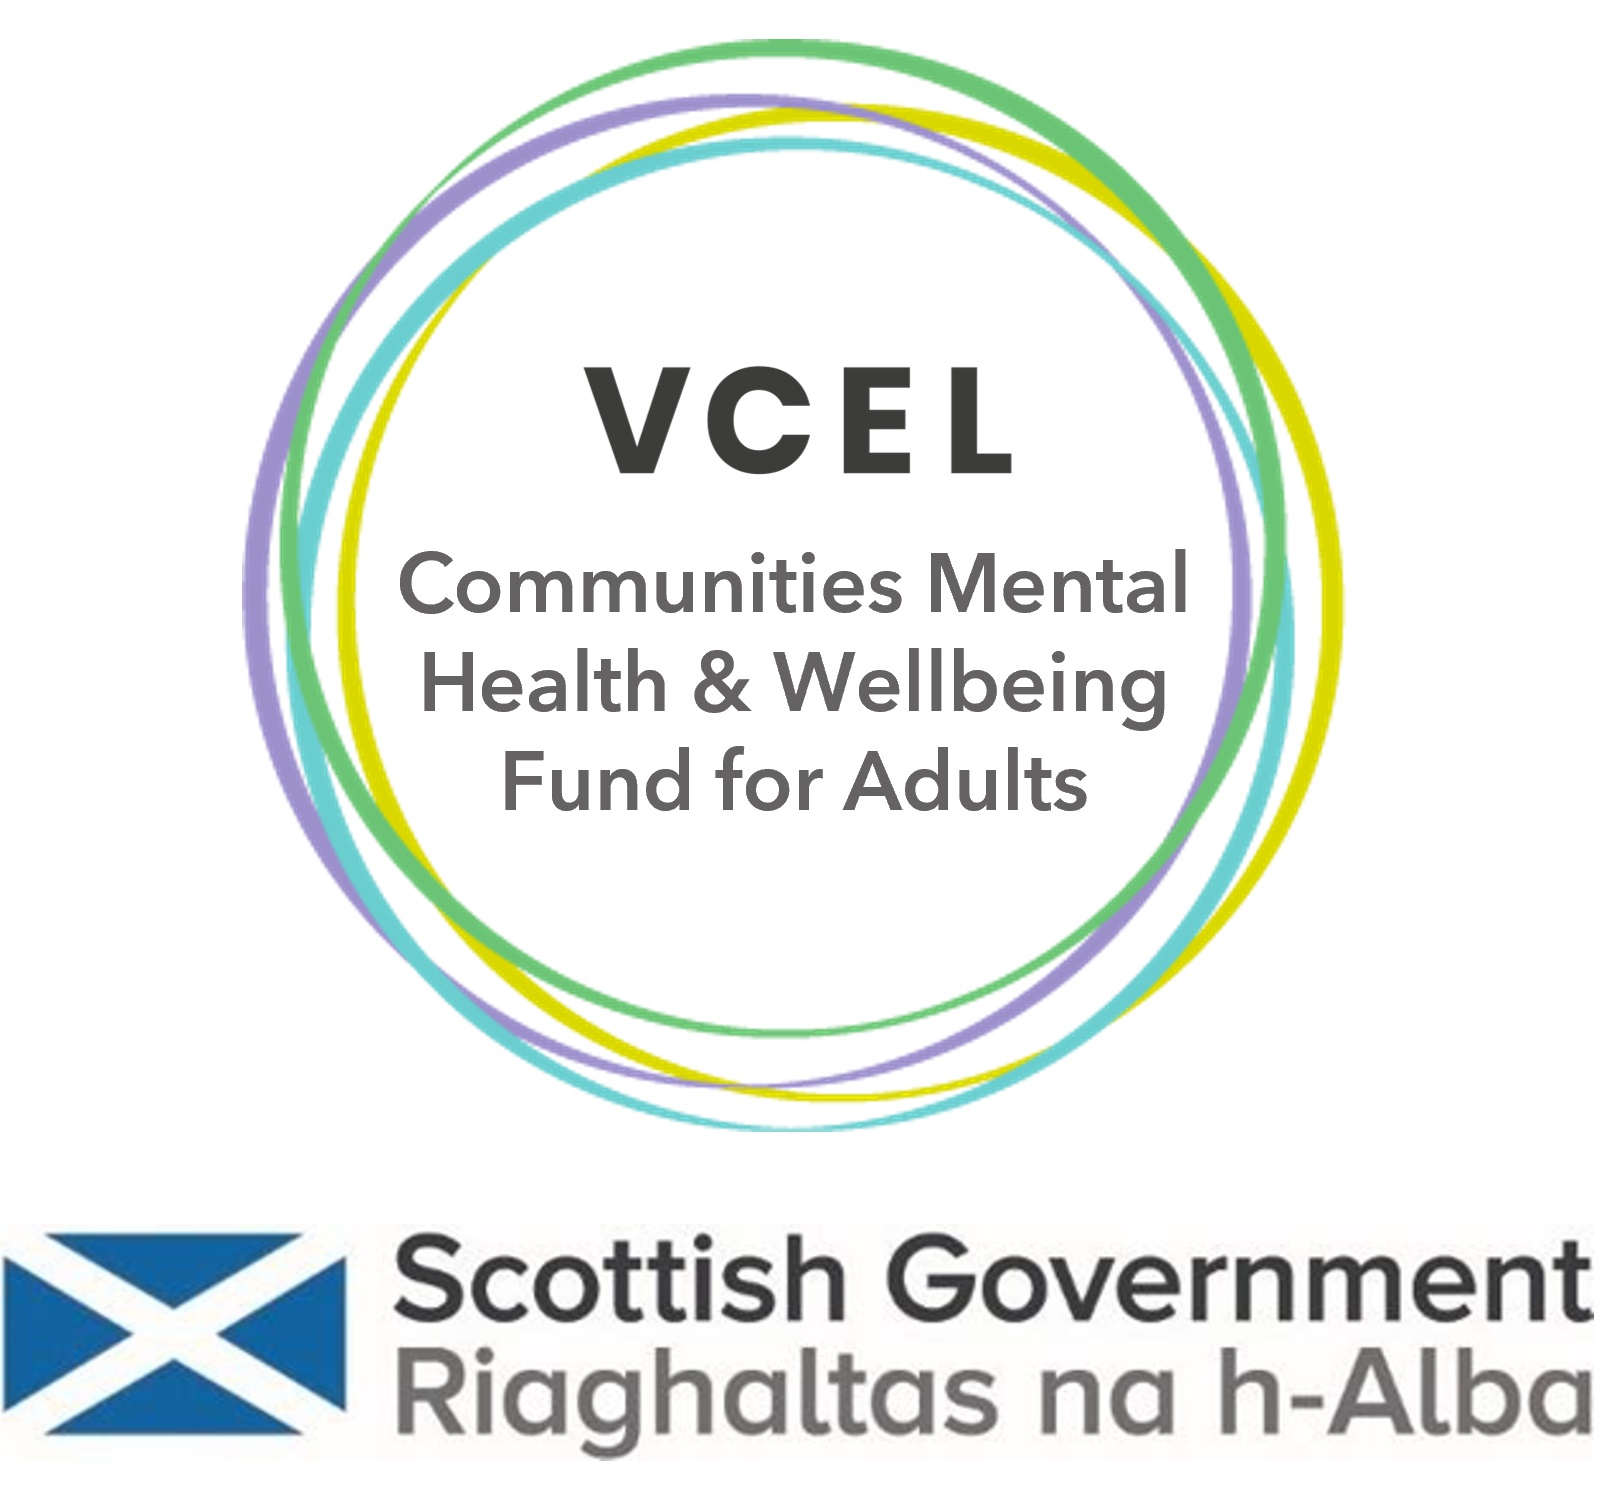 The Volunteer Centre East Lothian logo with Scottish Government logo